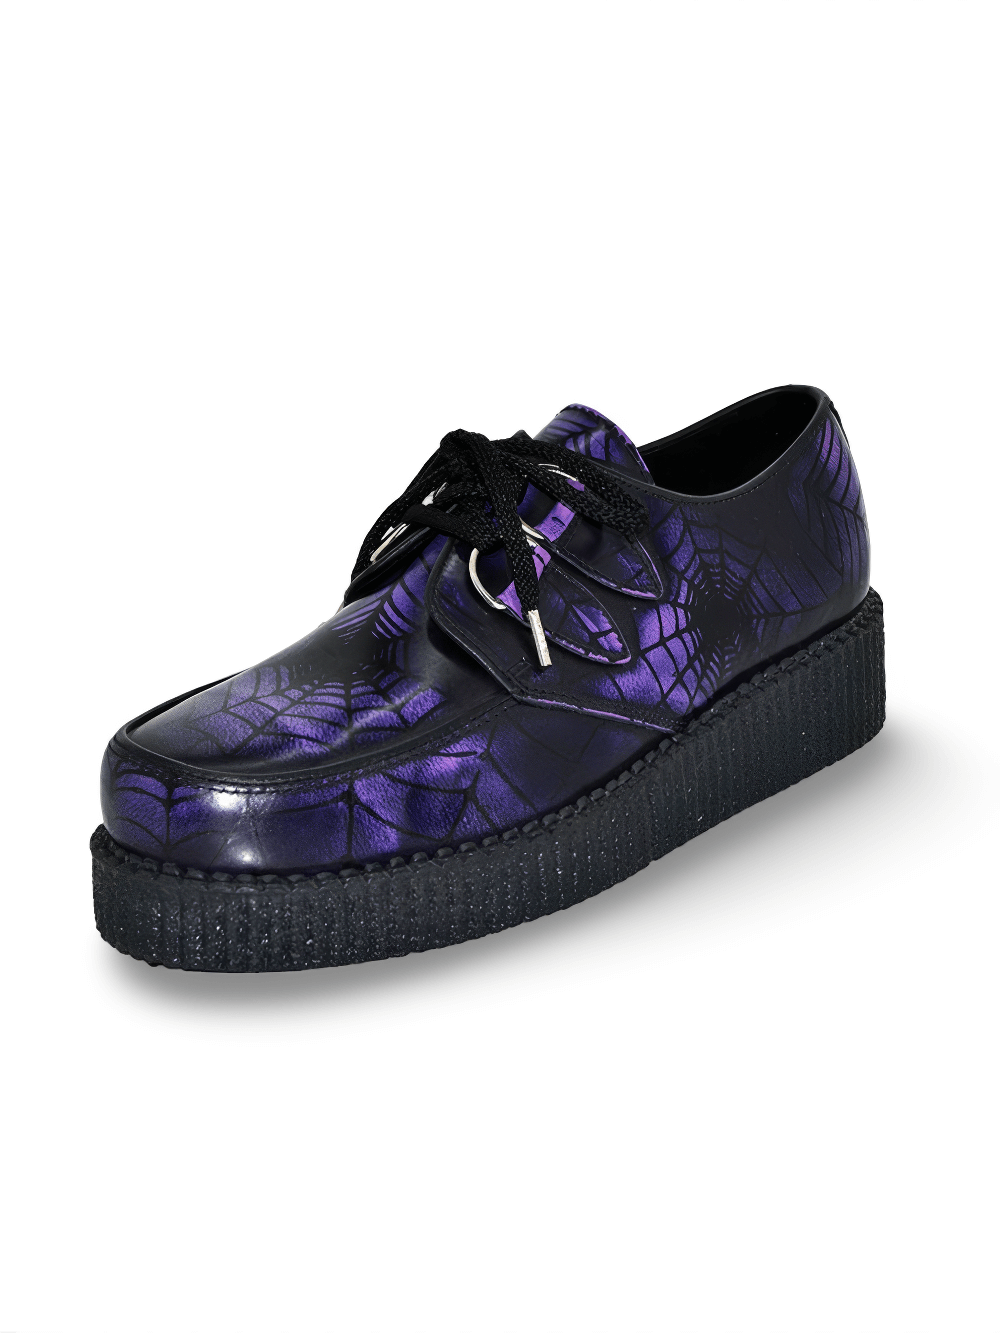 Gothic Unisex Leather Creepers Featuring Spider Design